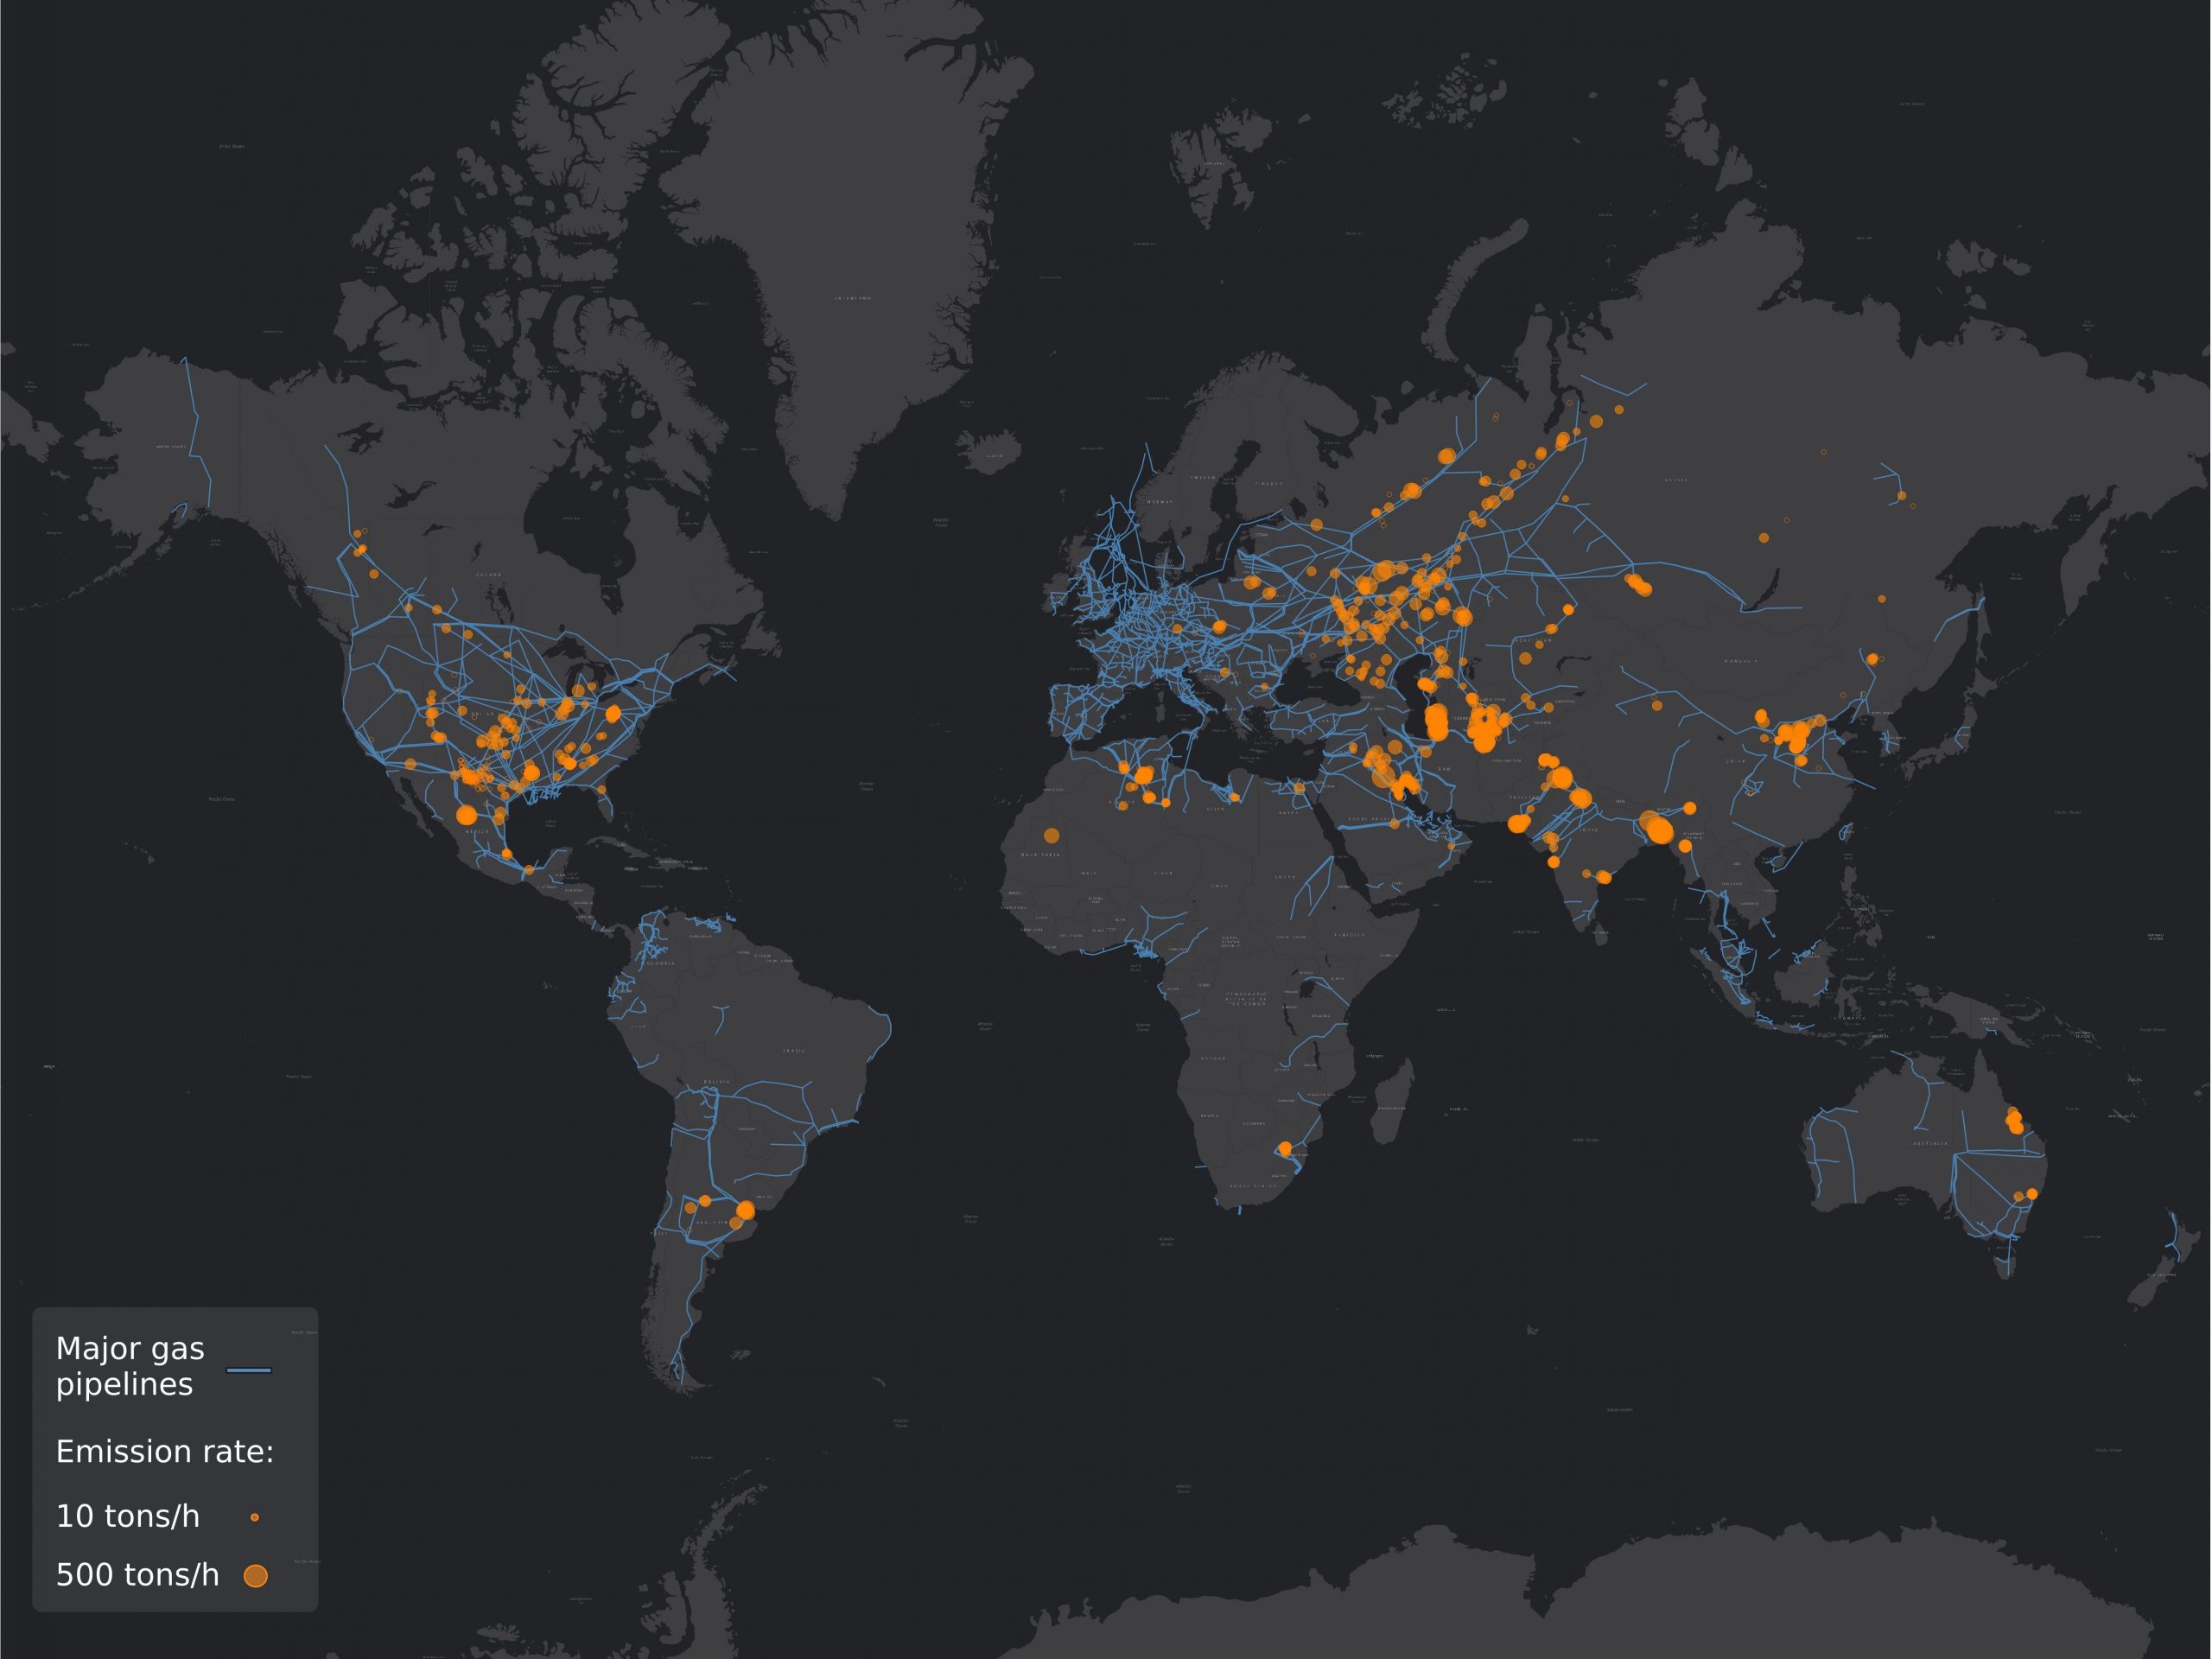 world map shows oil gas pipelines with clusters of orange dots representing major methane emissions